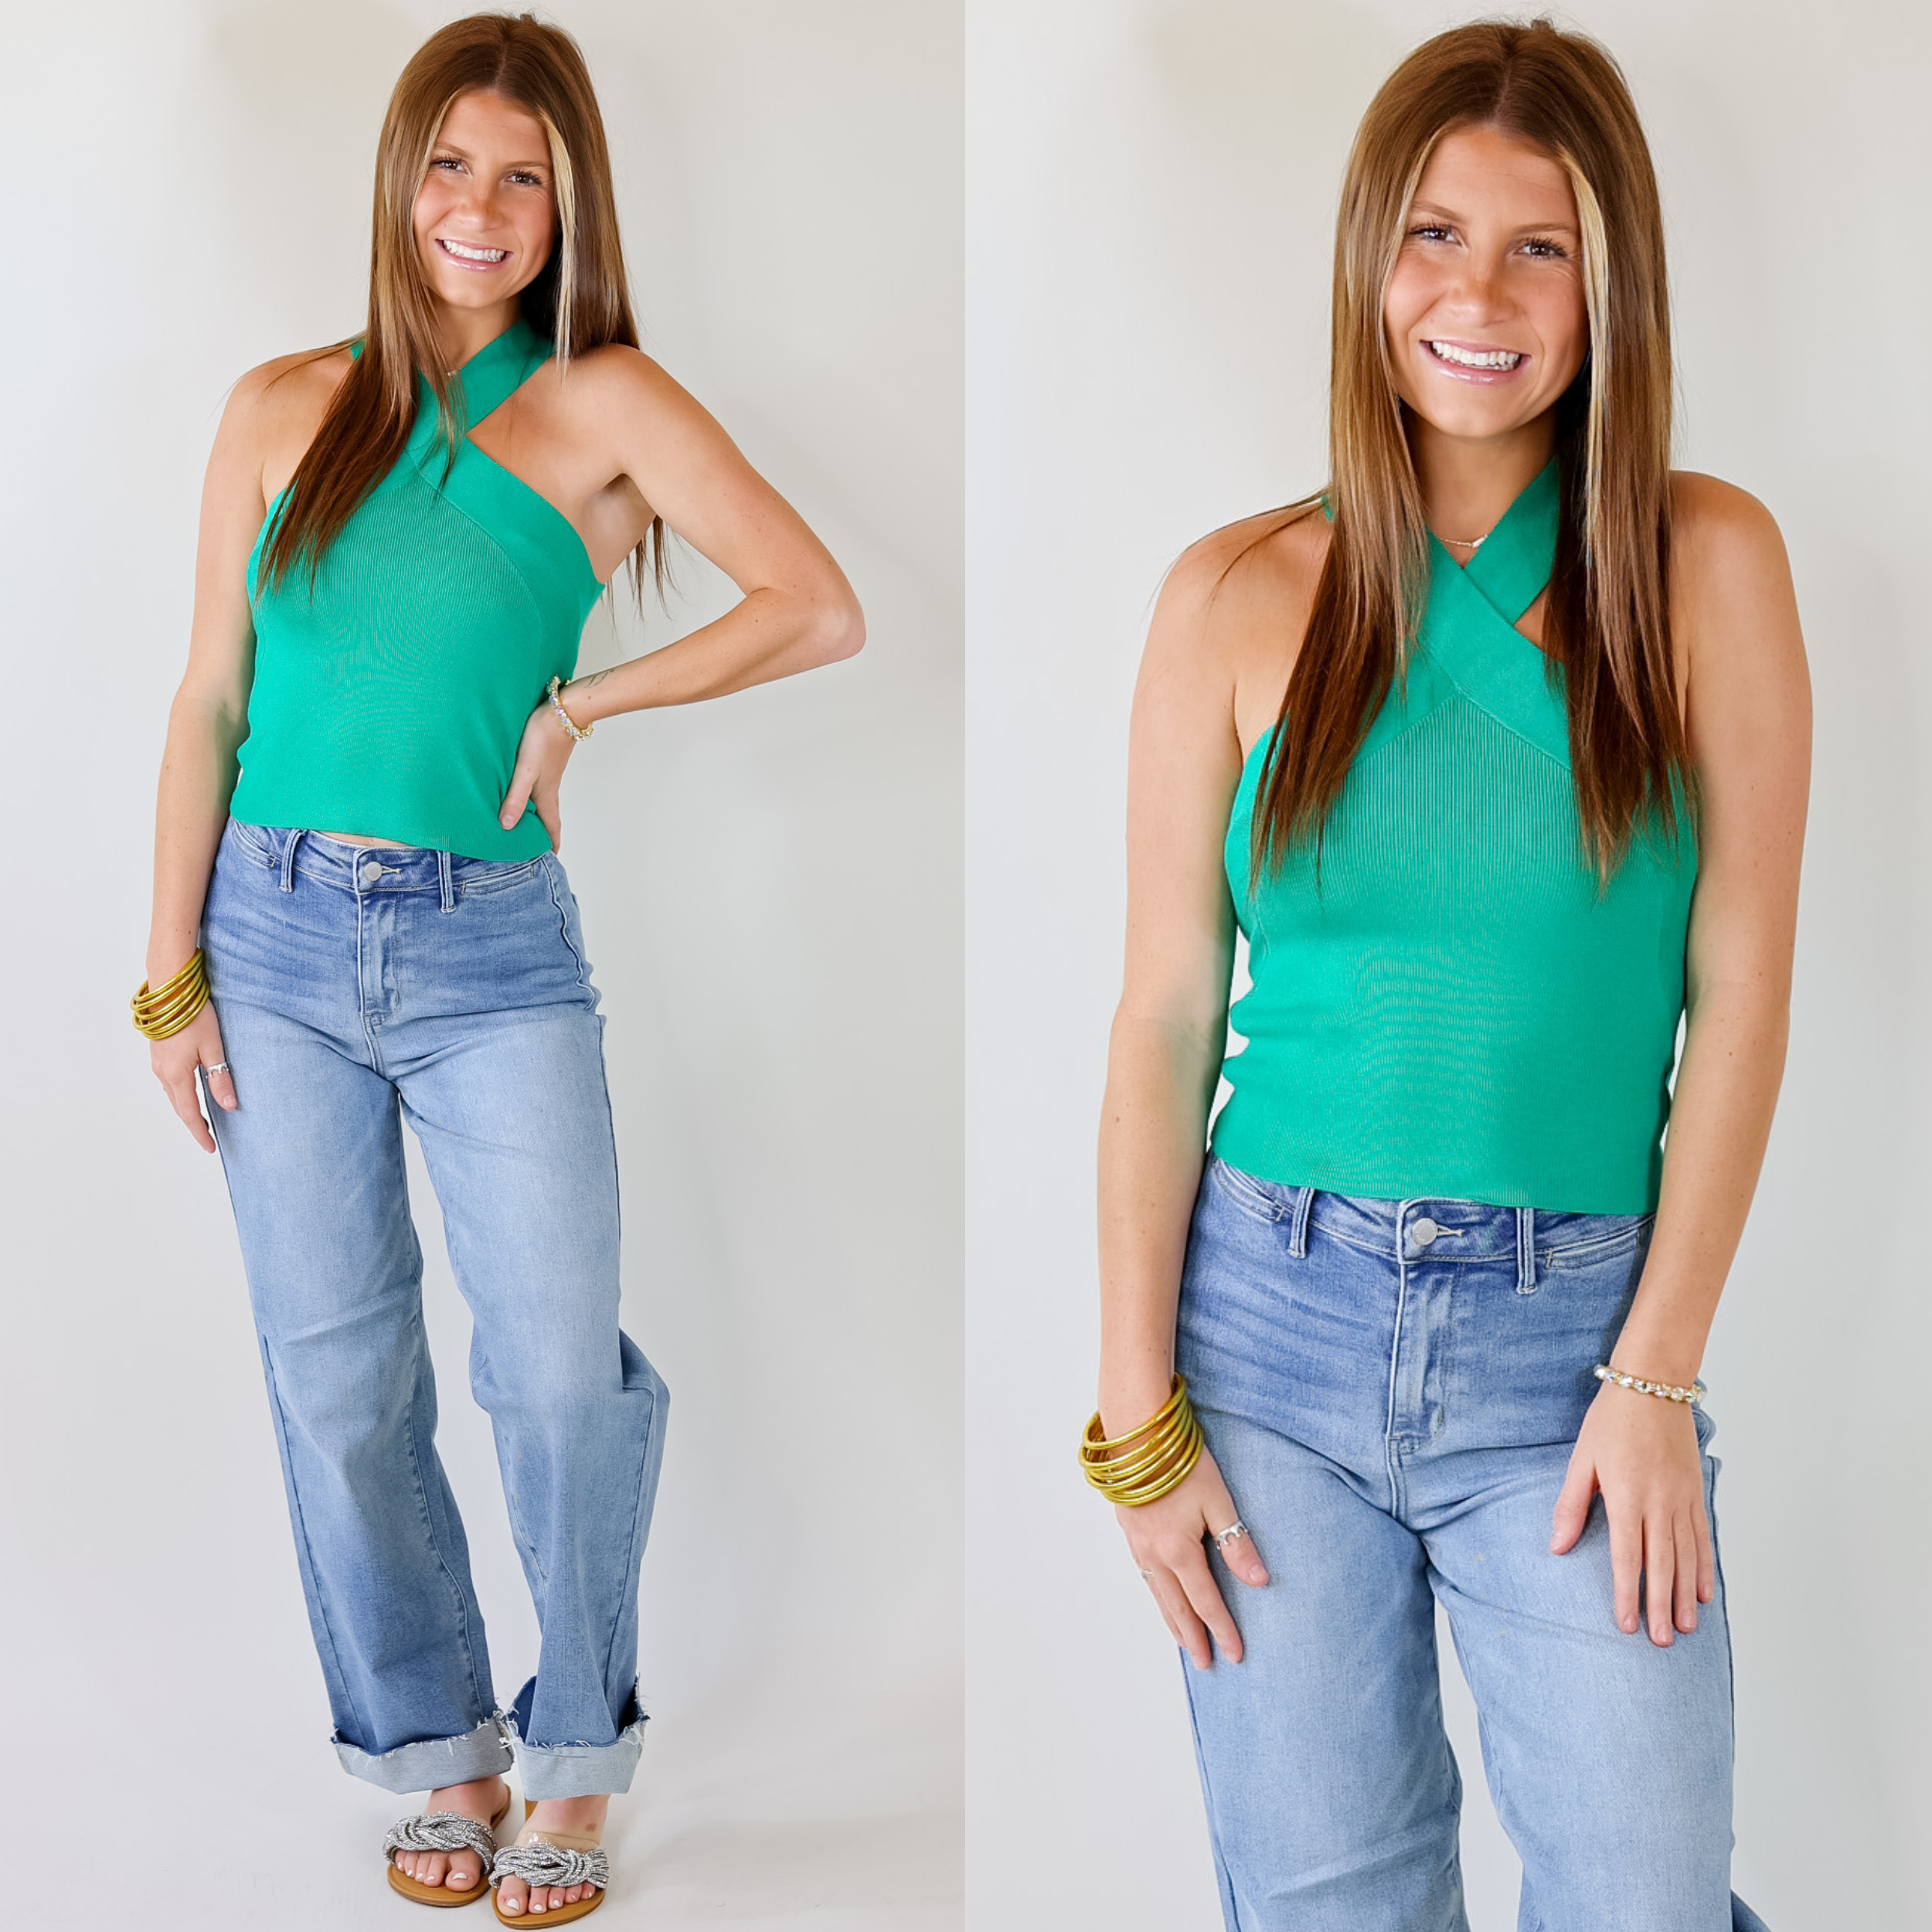 Talk To Me Crossed Strap Top in Green - Giddy Up Glamour Boutique